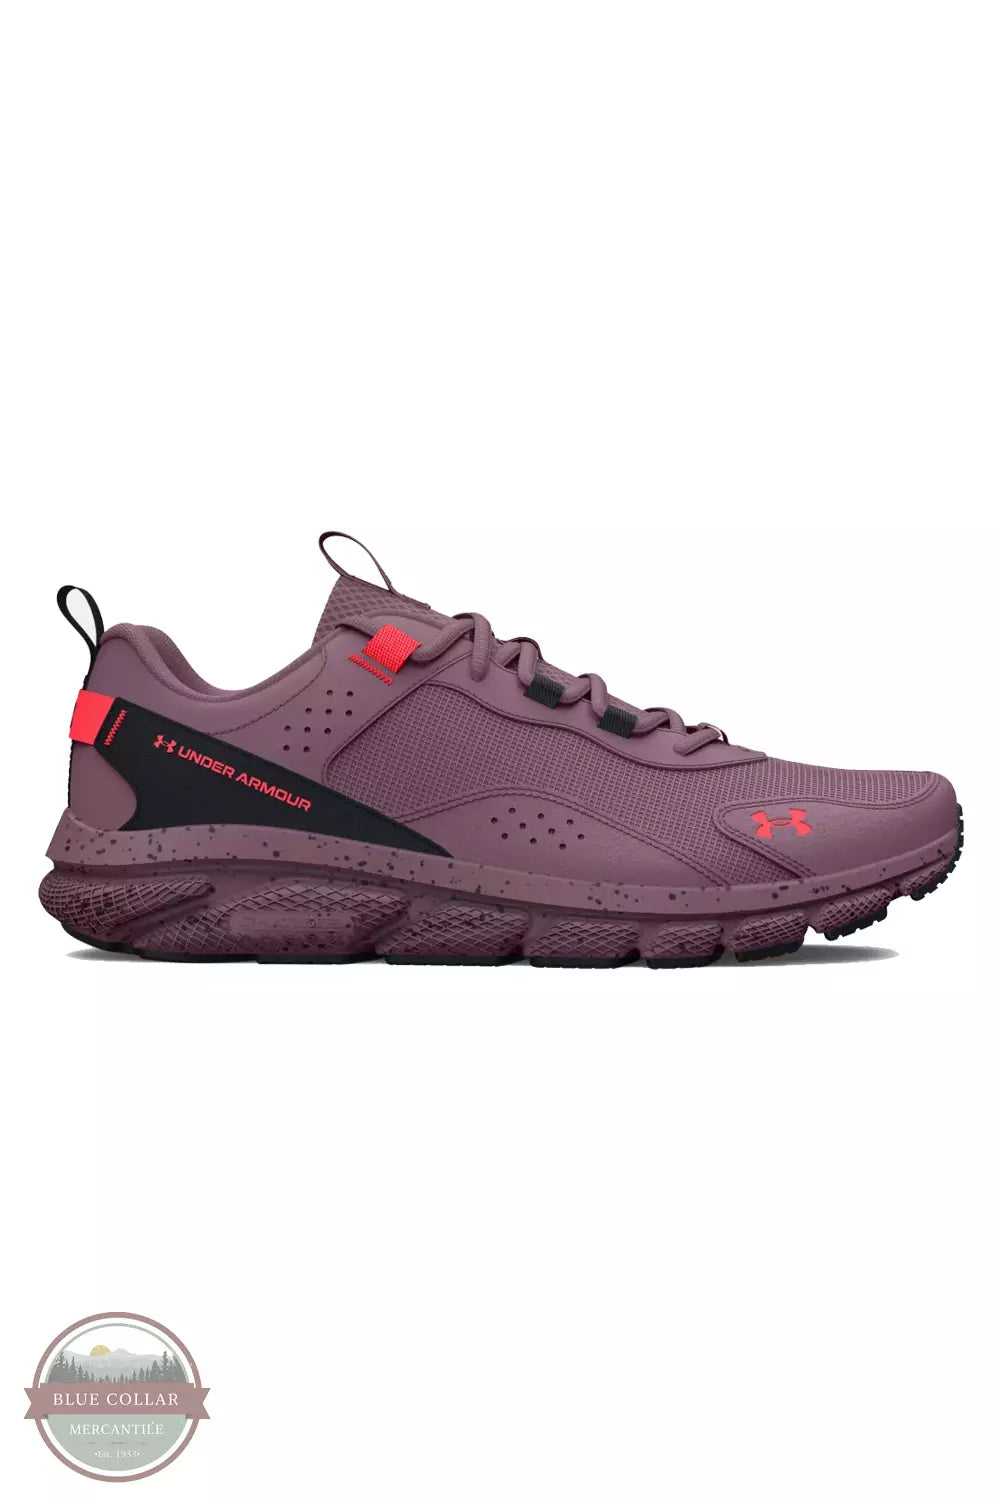 Under Armour 3025751-603 Charged Verssert Speckle Running Shoes in Misty Purple Side View